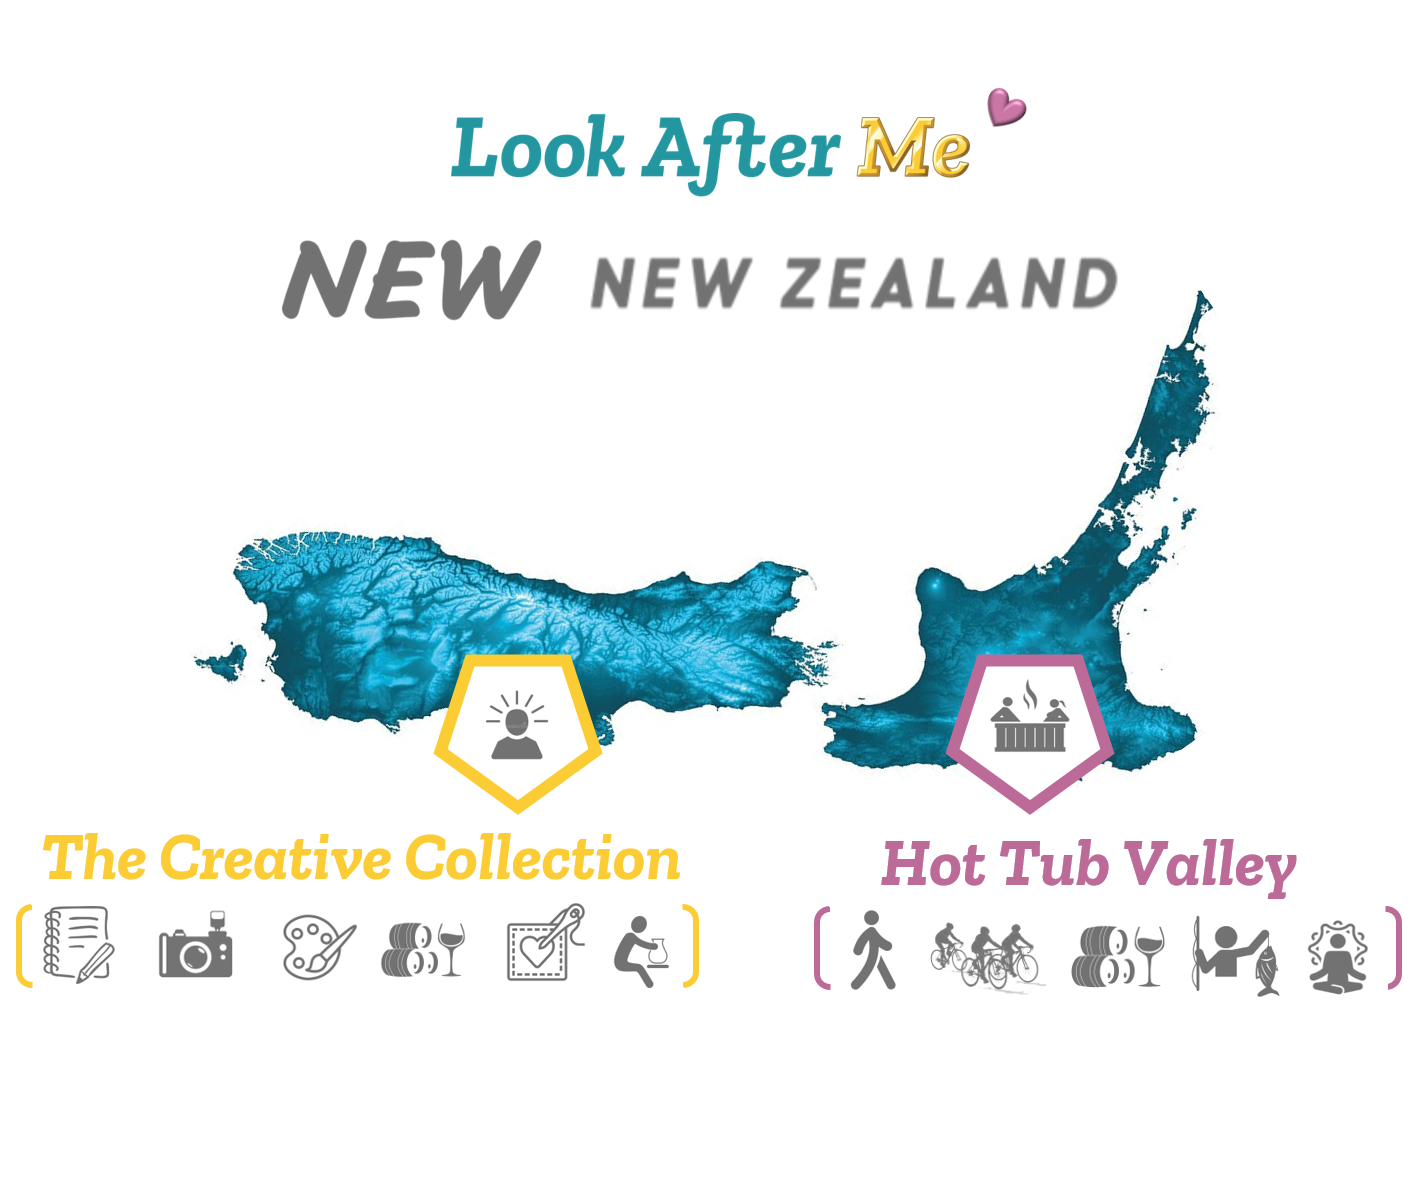 tThe New New Zealand has two collections - North Island Hot Tub Valley Collection and South Island Creative Collection